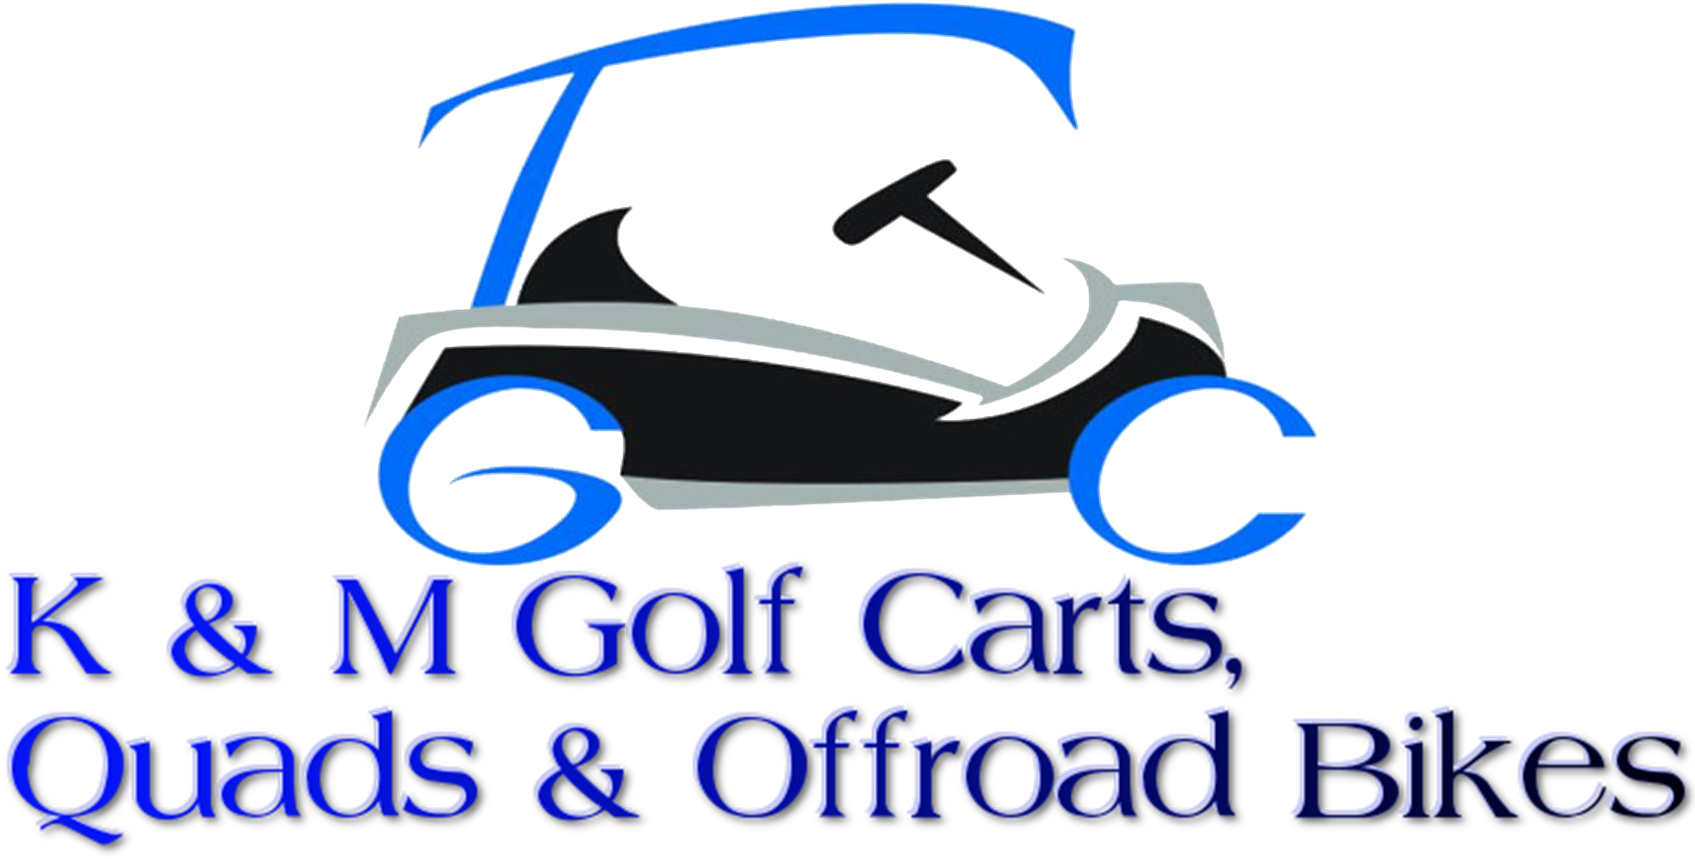 With Over 20 Years Of Experience Specialising In Golf - Triad Golf Carts (1707x890)